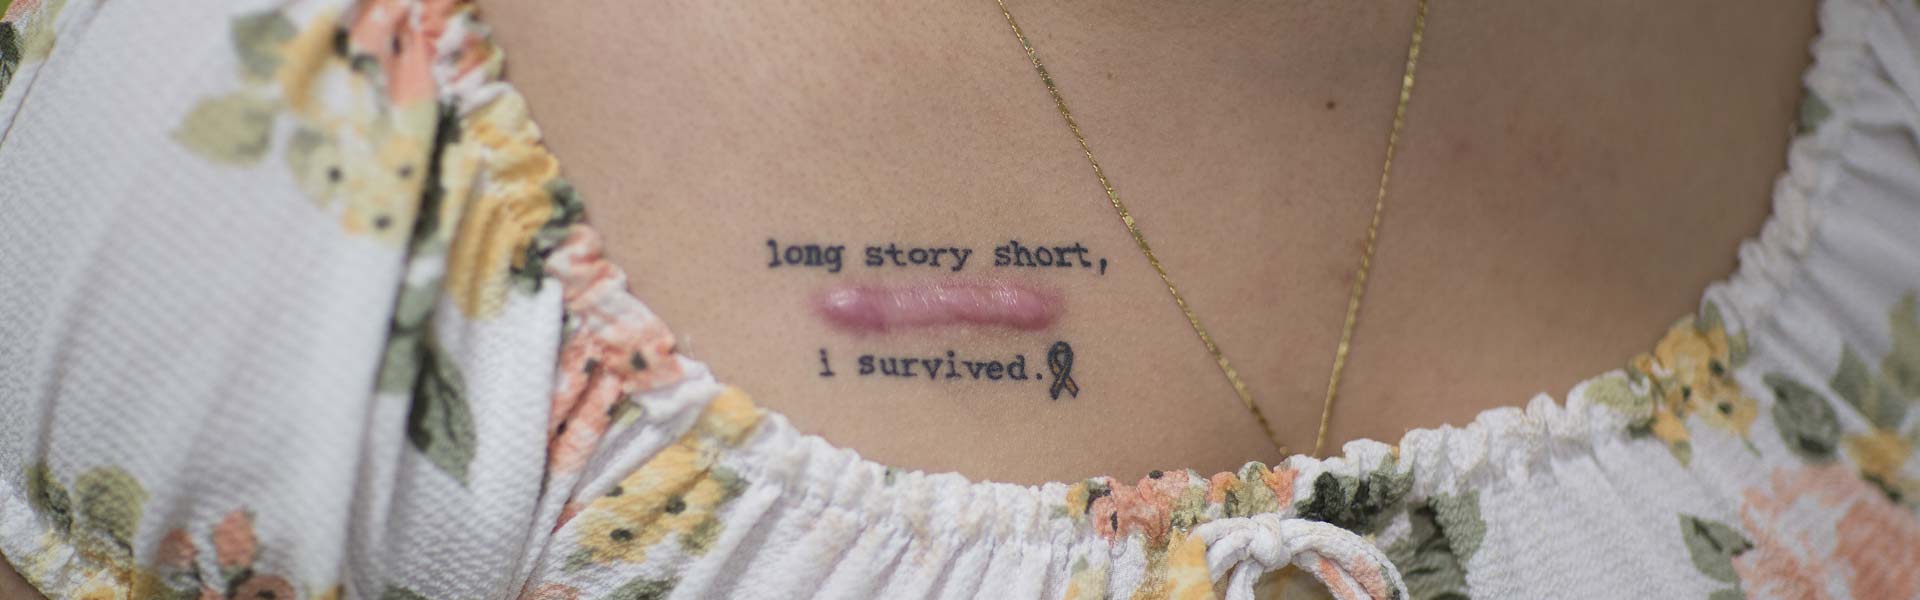 Long Story Short, I Survived Tattoo on chest above scar on a Female